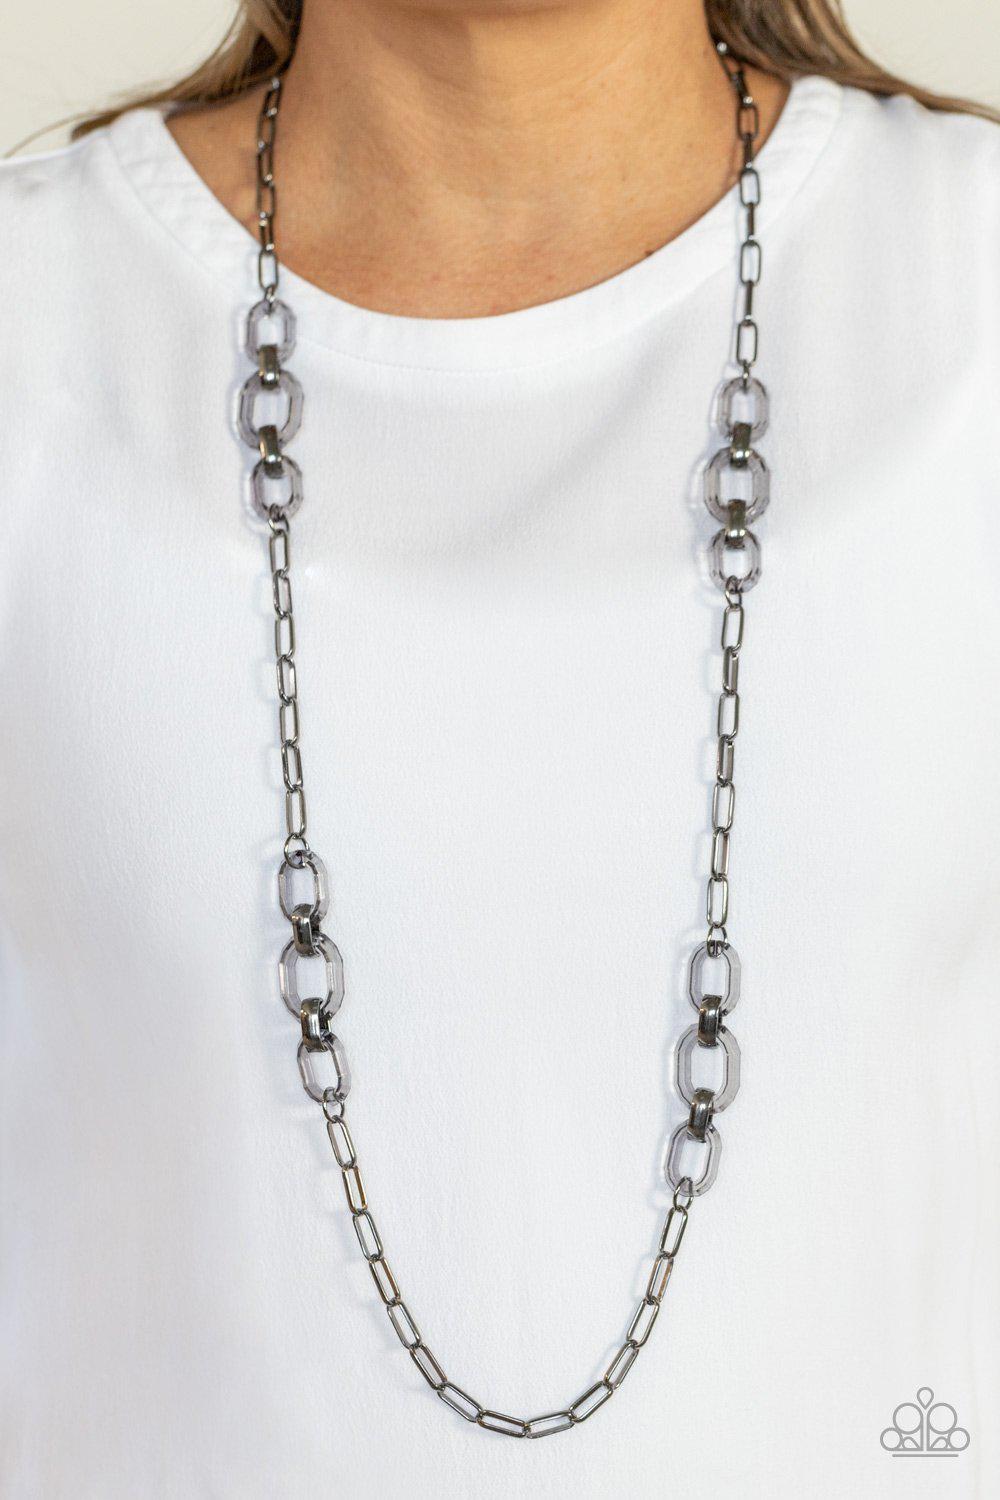 Have I Made Myself Clear? Gunmetal Black and Acrylic Necklace - Paparazzi Accessories- model - CarasShop.com - $5 Jewelry by Cara Jewels